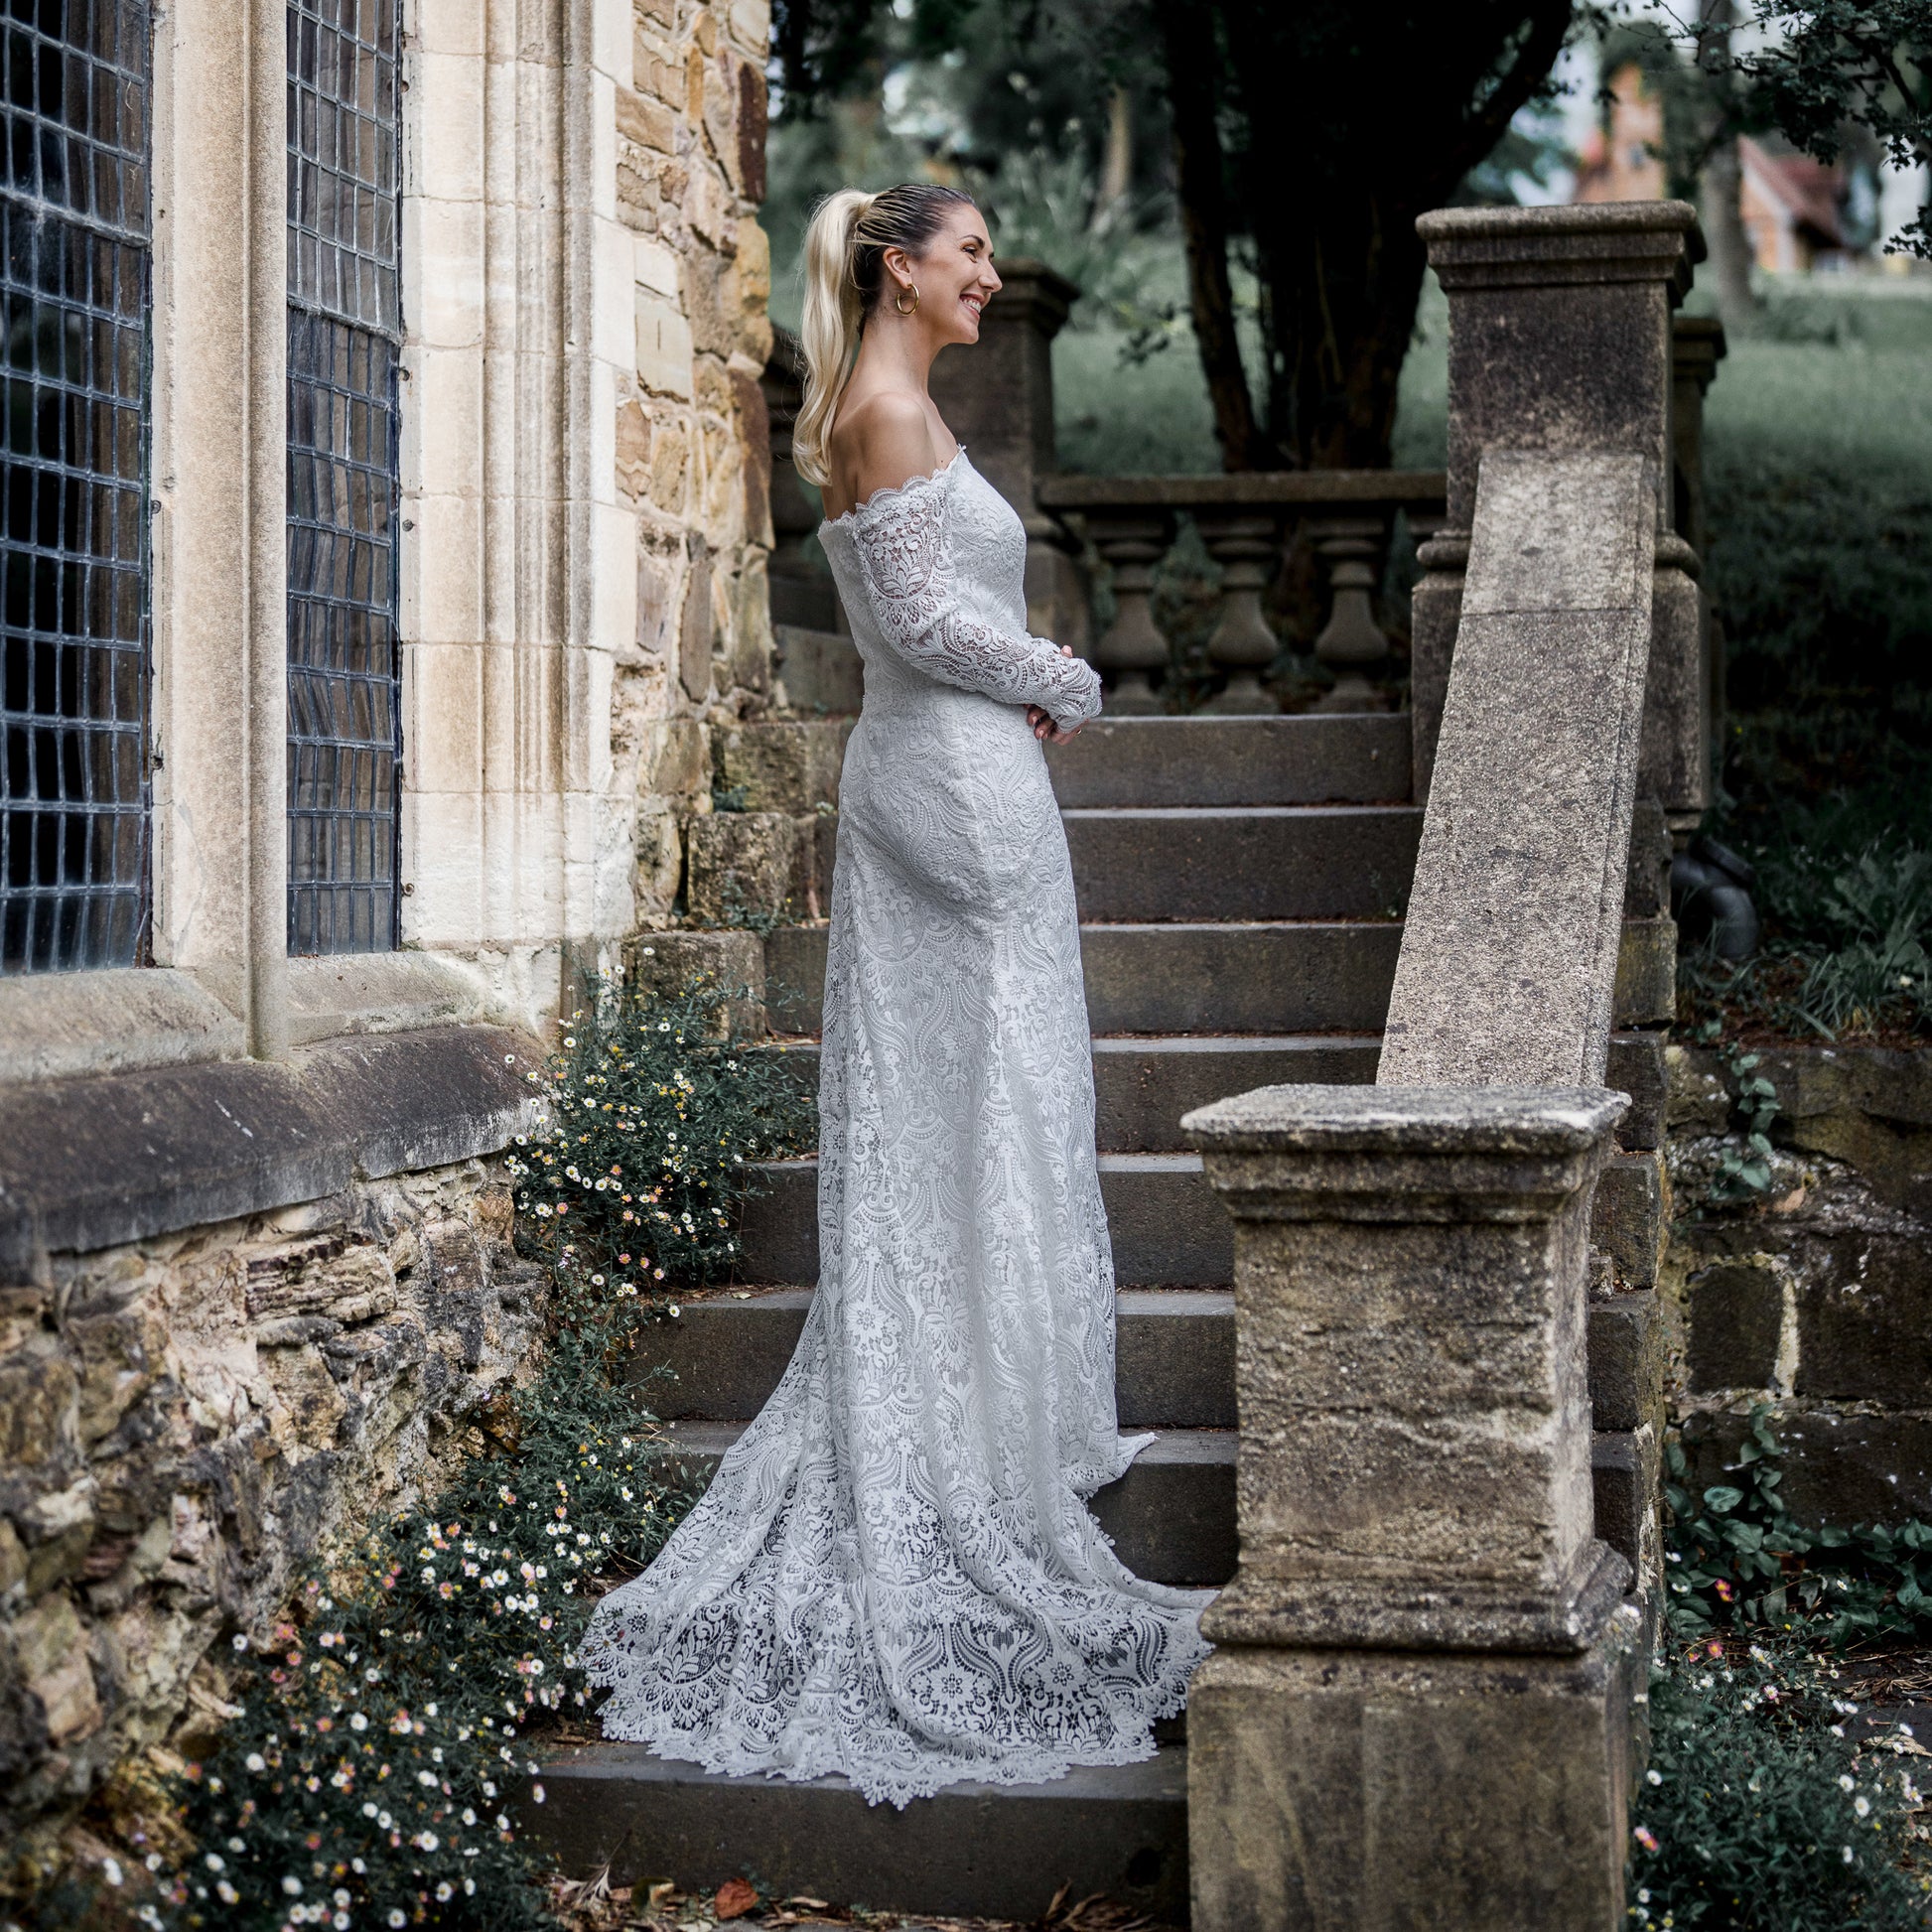 Stunning bride in the Celaya wedding dress featuring off-the-shoulder sleeves, scalloped trim, and a gracefully trailing chapel train.